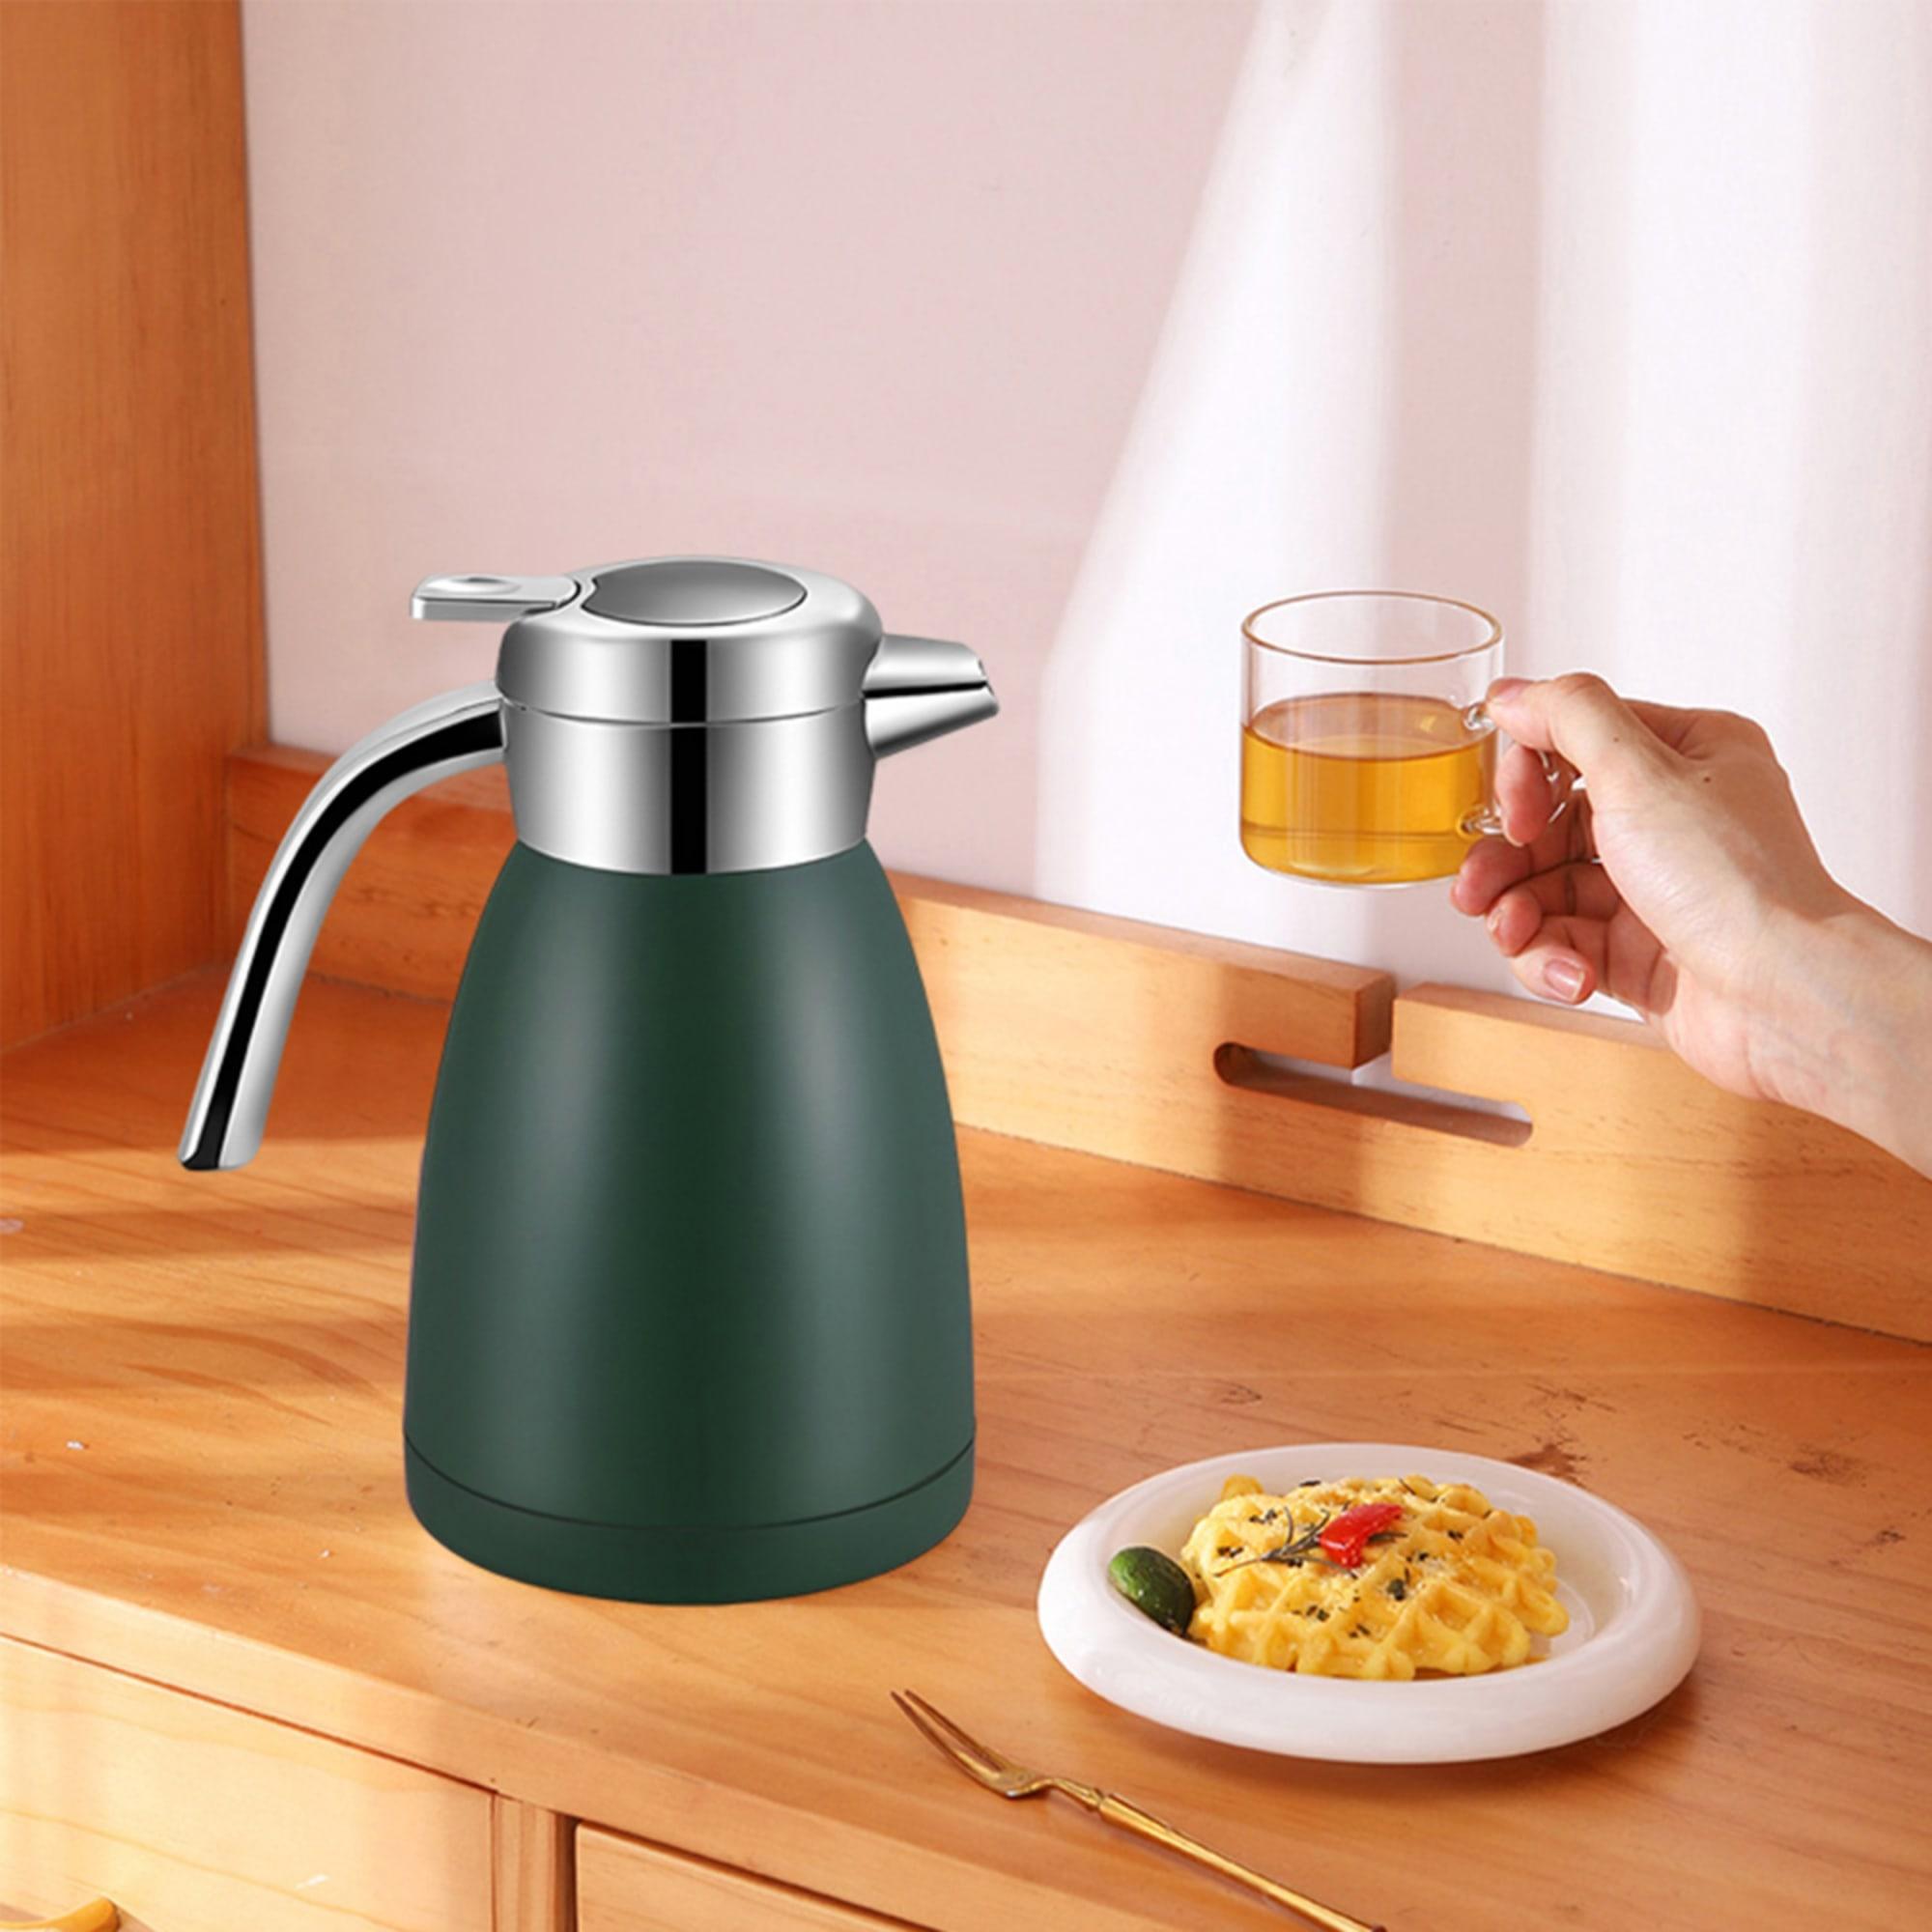 Soga Stainless Steel Insulated Kettle 1.8L Green Image 2